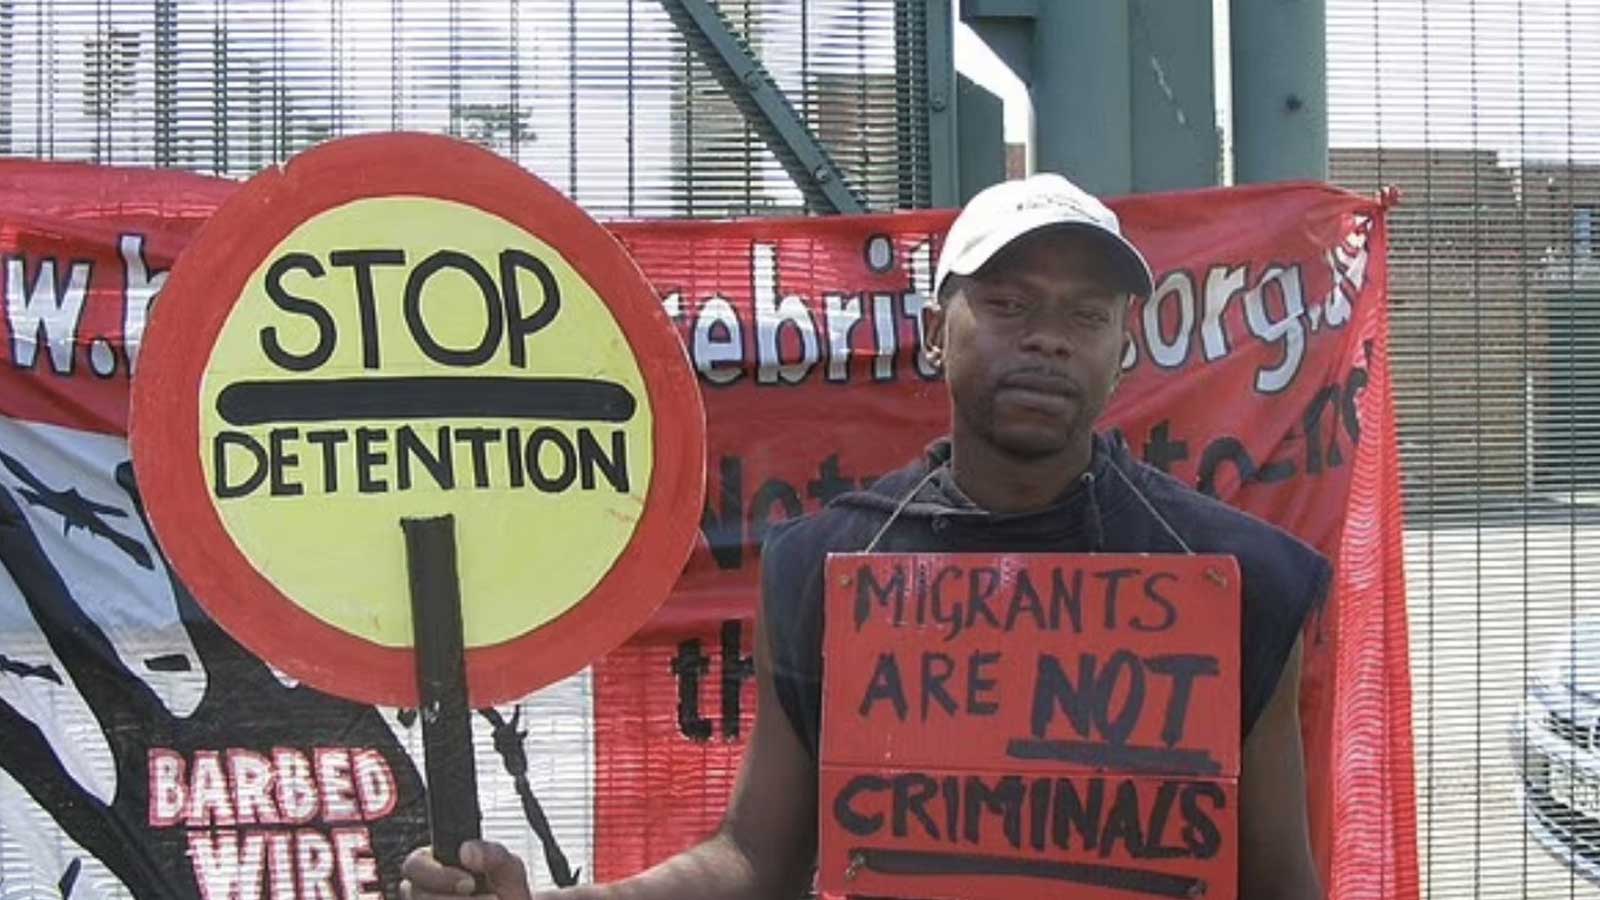 UK: Illegal migrant who protested with sign reading “Migrants are not criminals” pleads guilty to rape of 15-year-old girl